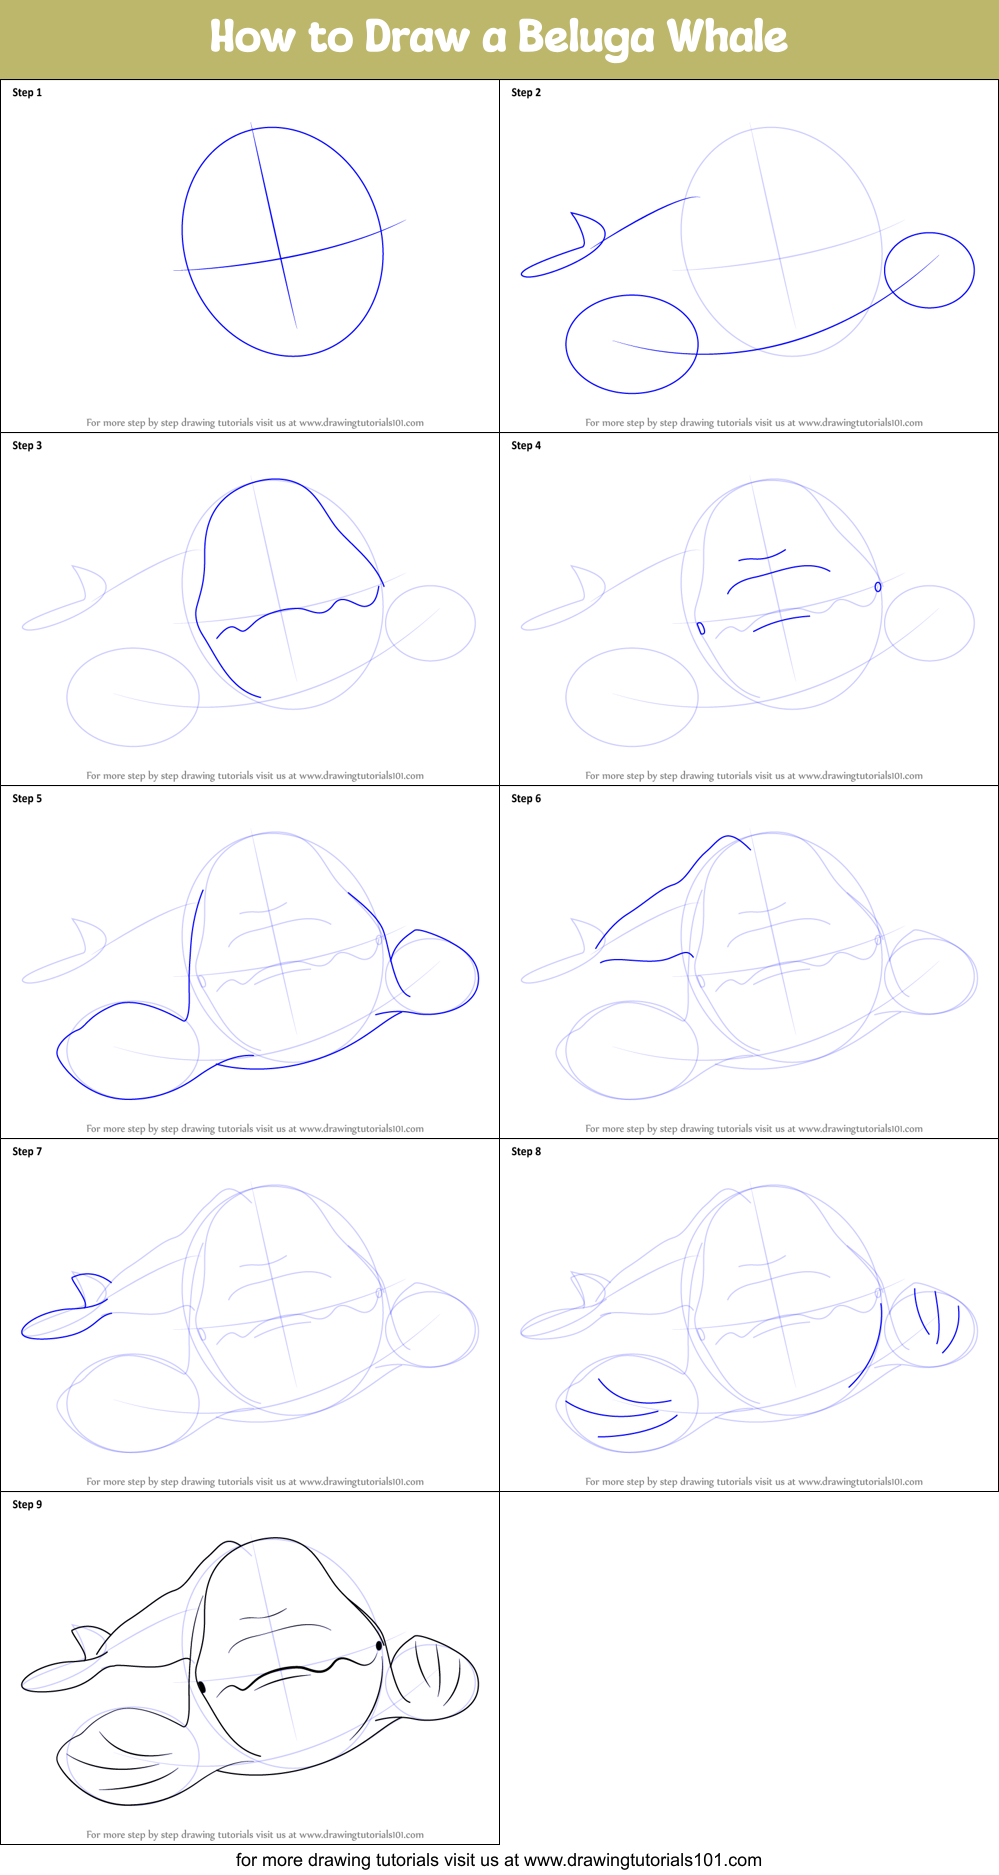 How to Draw a Beluga Whale printable step by step drawing sheet